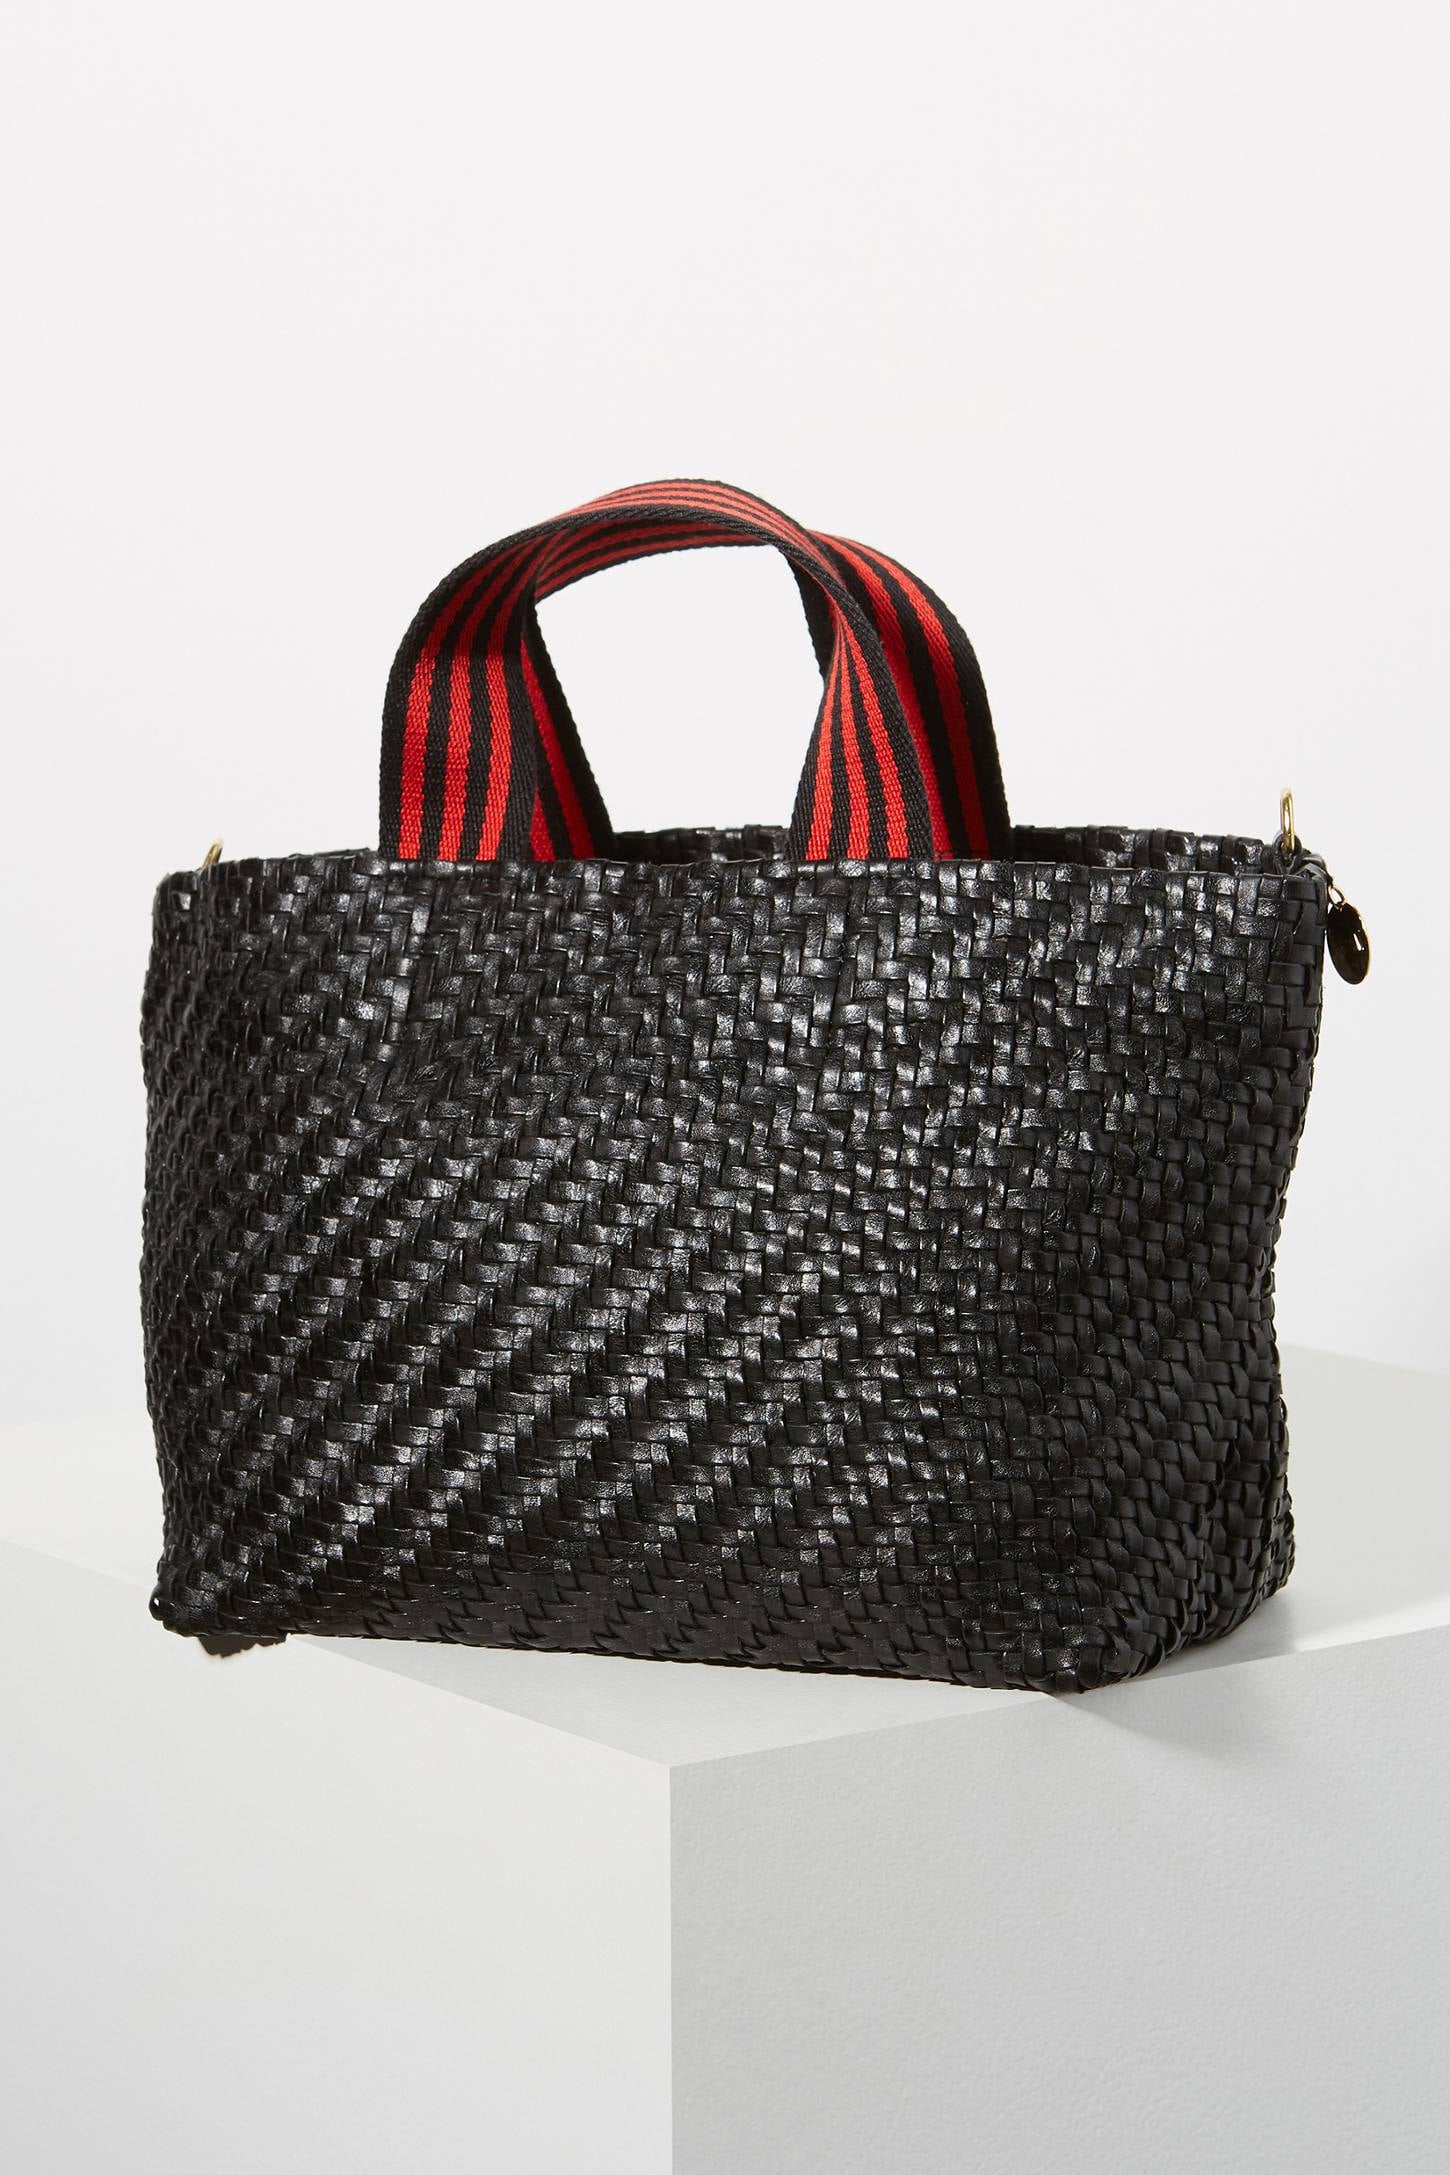 Clare V, Bags, Clare V Leather Woven Bateau Tote Bag In Black Checker Nwt